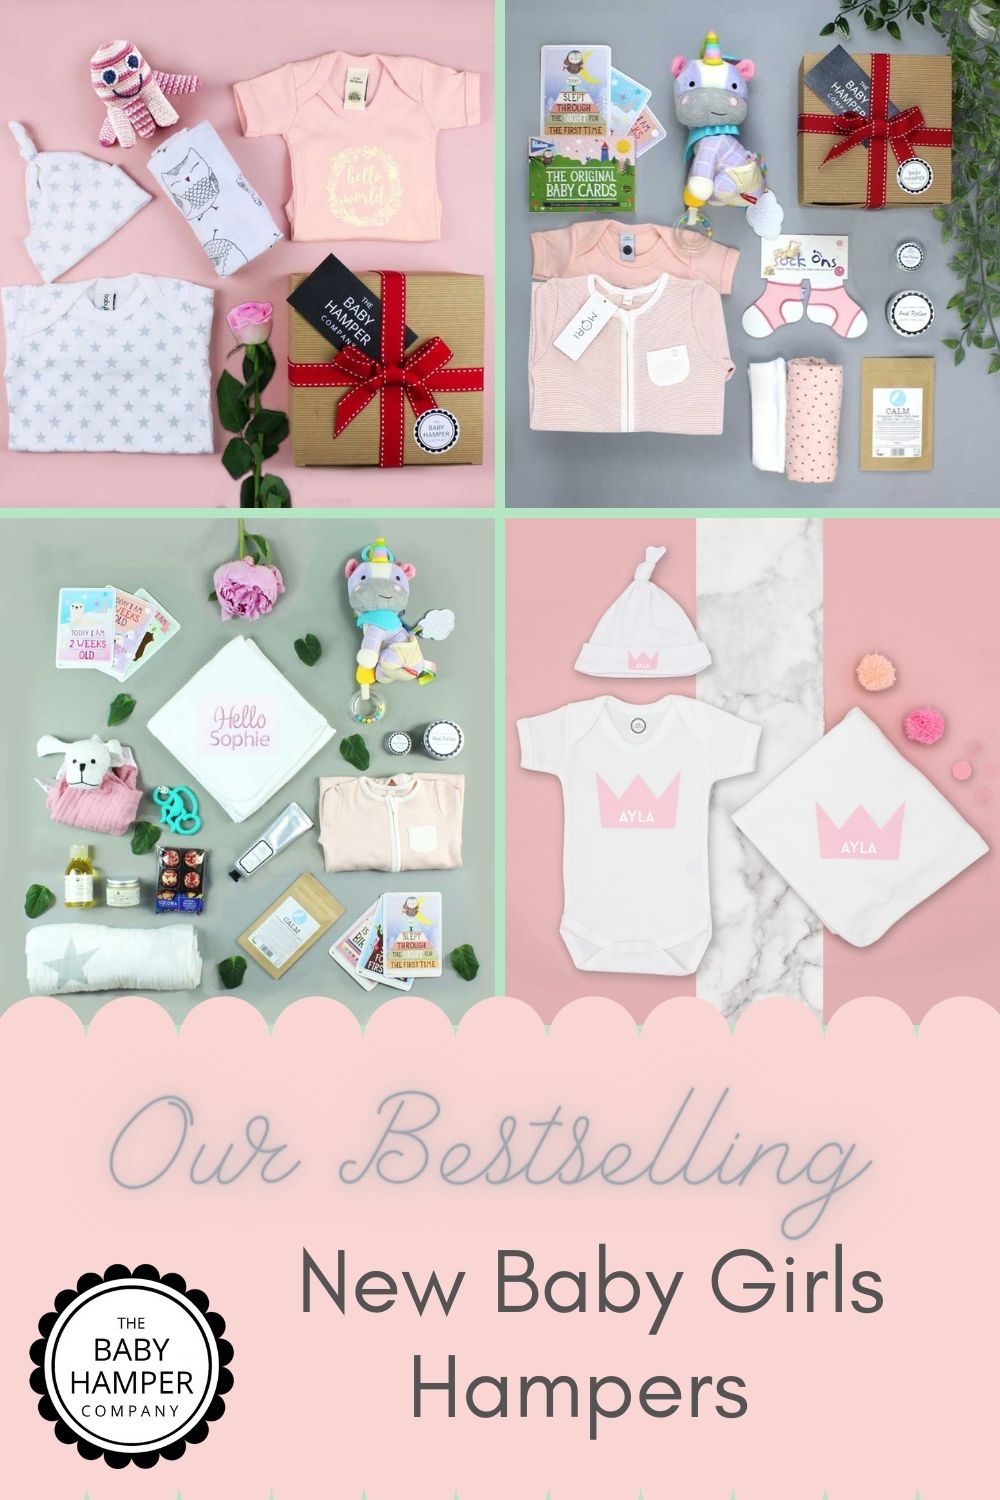 Our Bestselling New Baby Girls Hampers